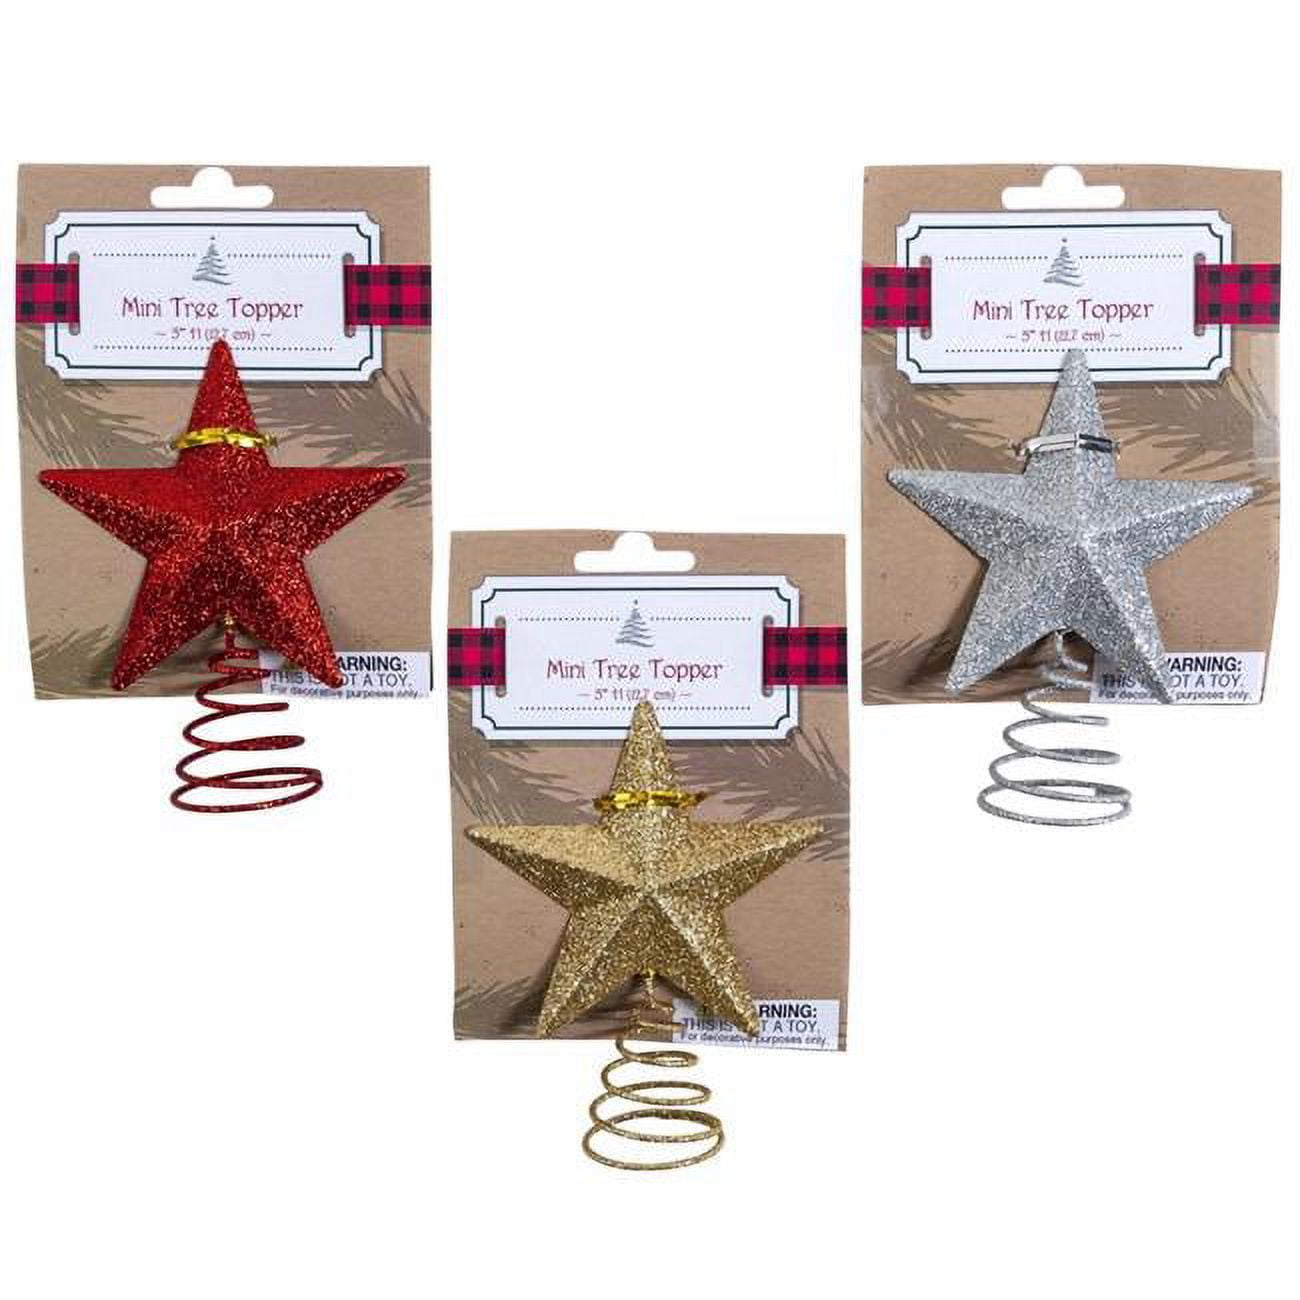 2342039 5 In. Mini Tree Topper, Gold, Silver & Red - Case Of 24